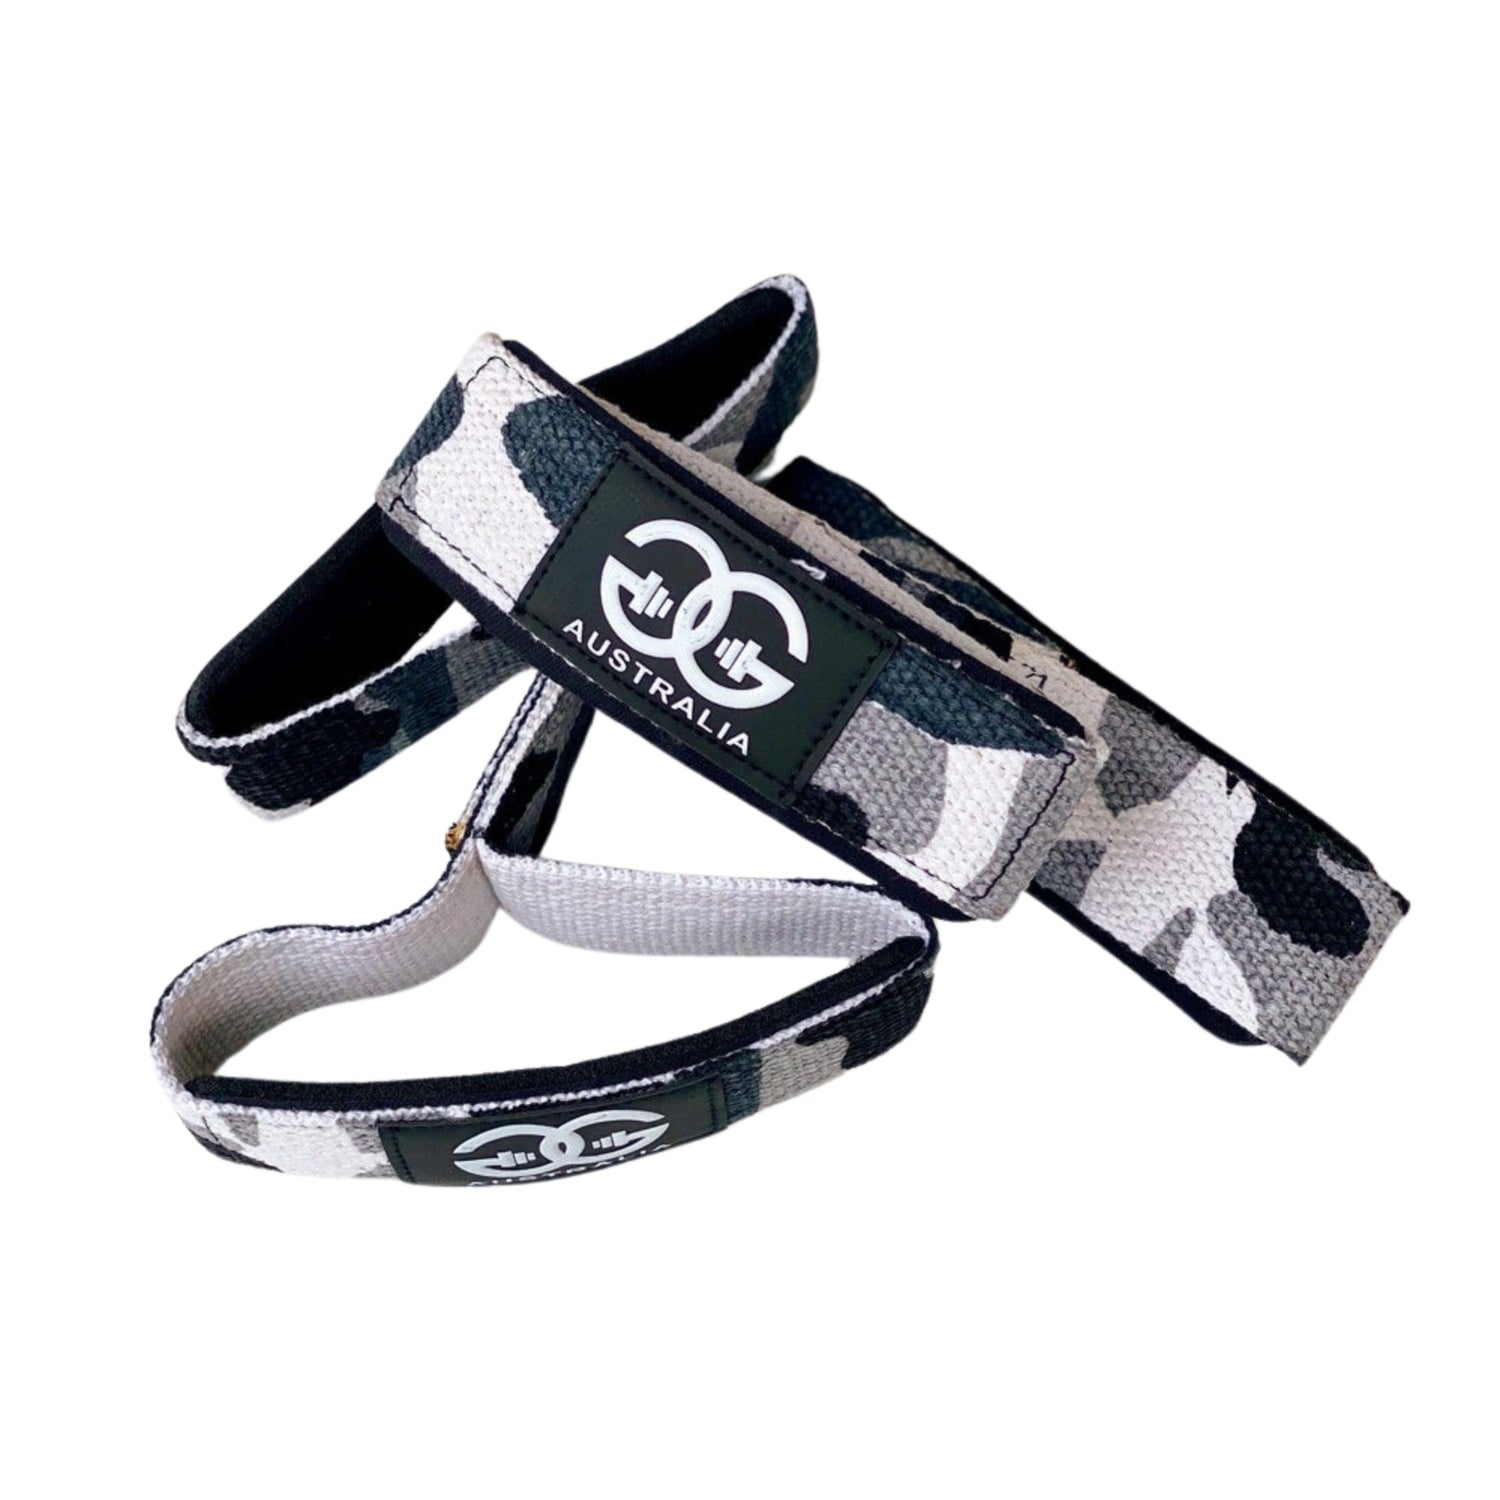 Get Gripped Figure 8 Strap